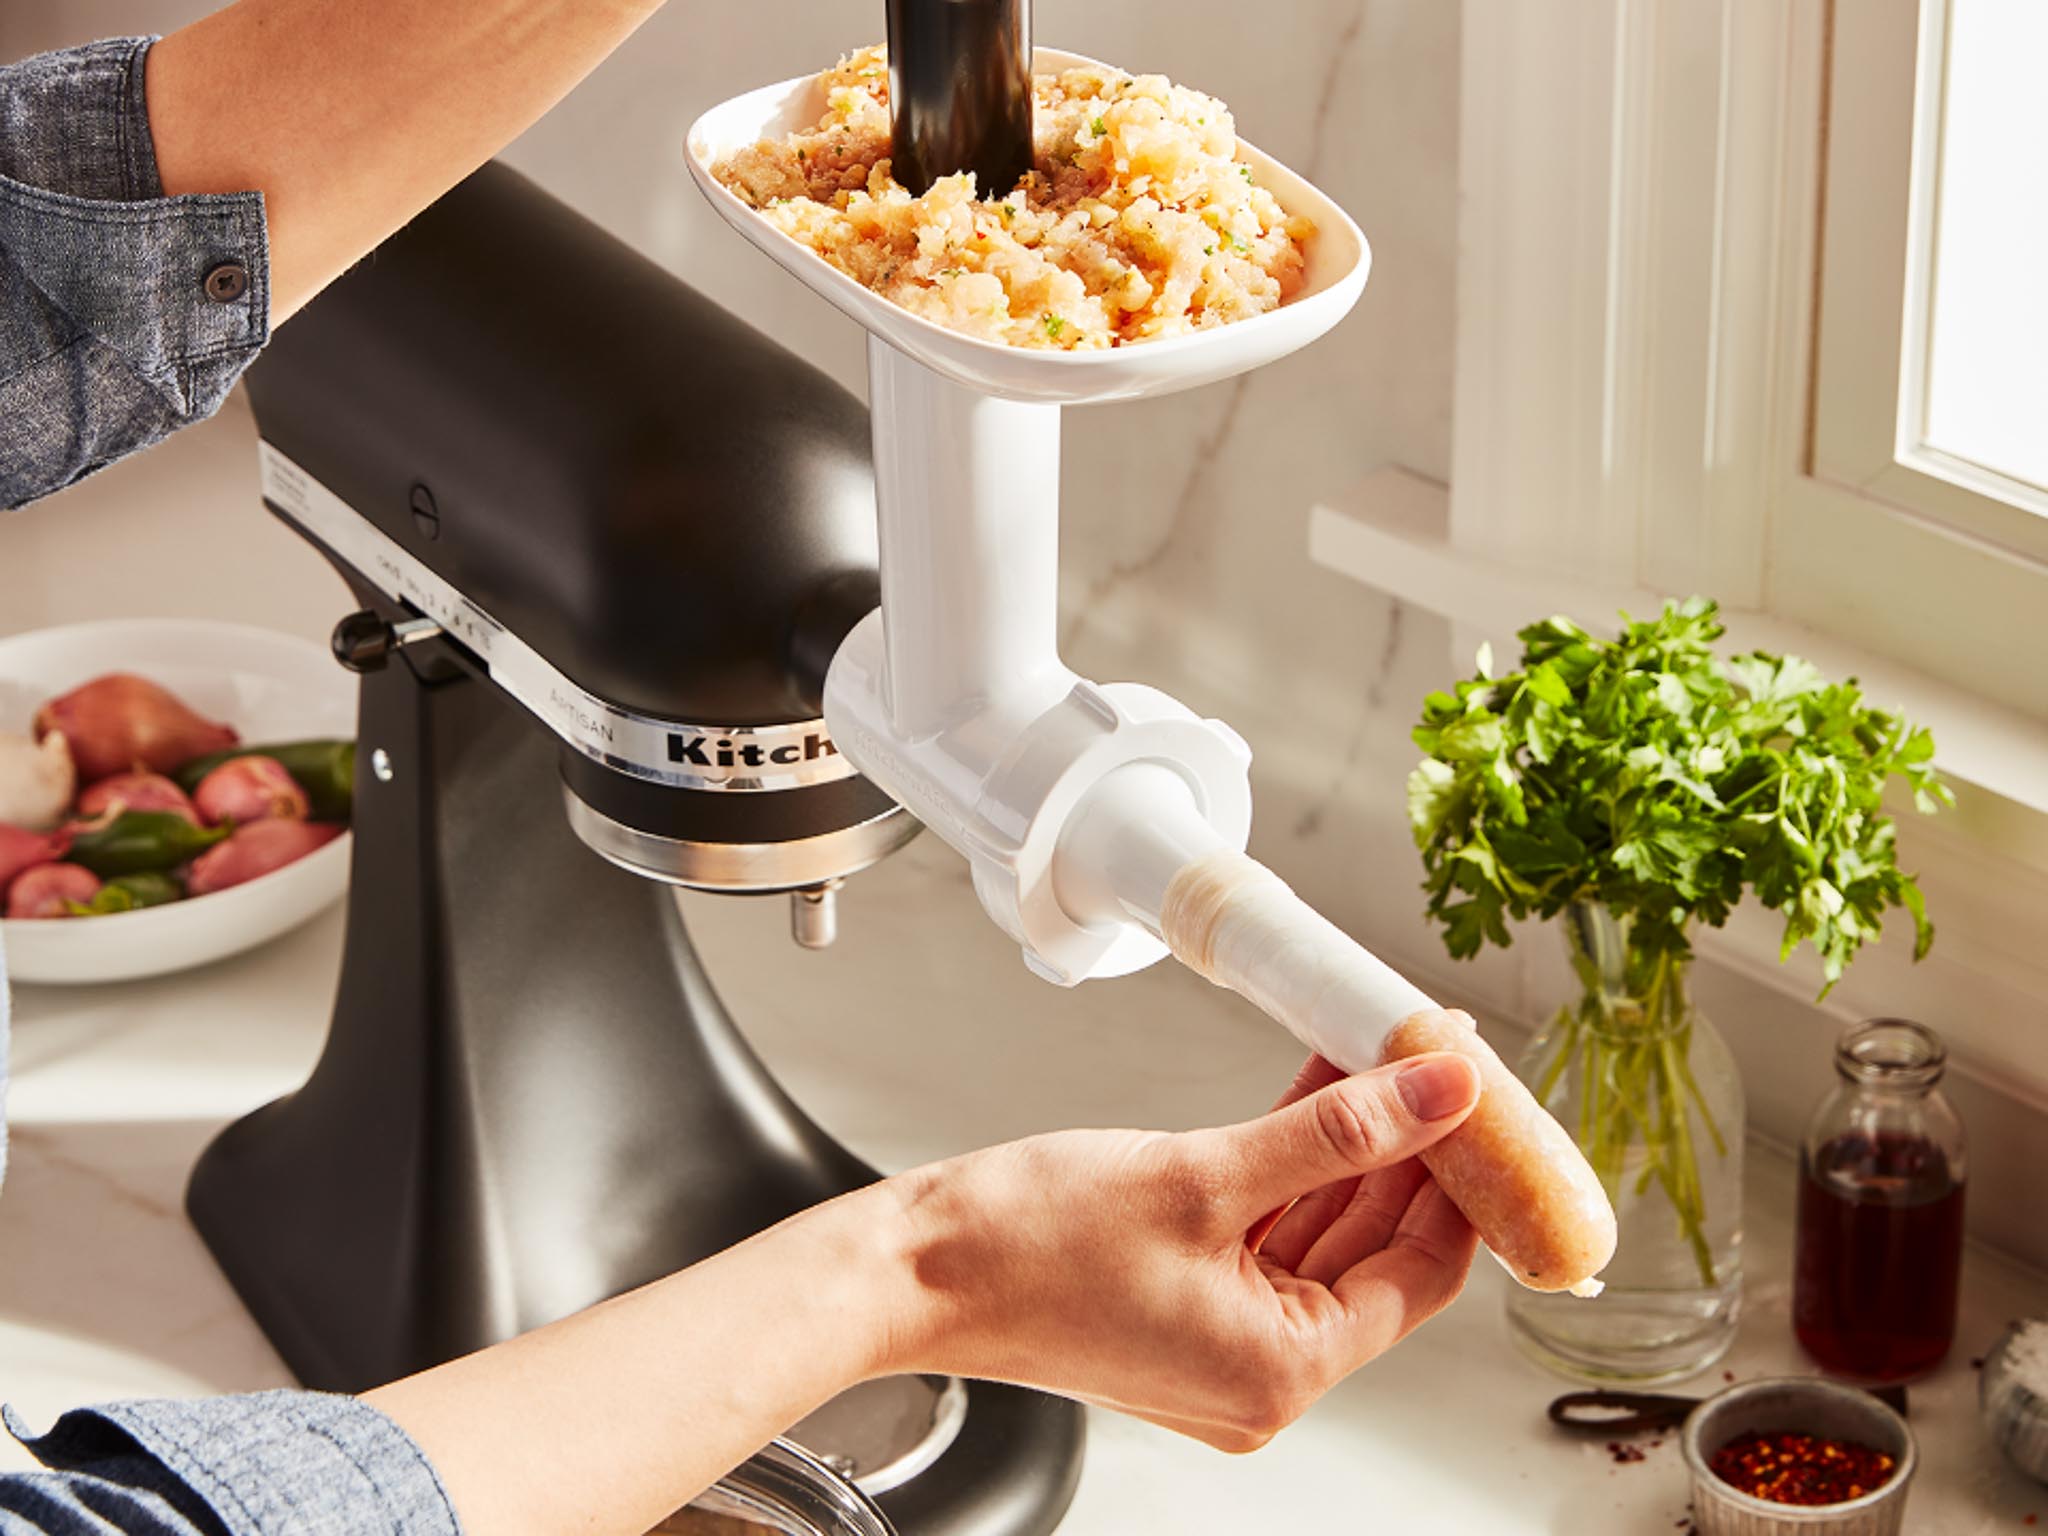 Mixer-attachments-sausage-stuffer-extension-pack-person-making-sausage-with-stuffer-tube-by-pushing-meat-through-the-meat-grinder-attachment